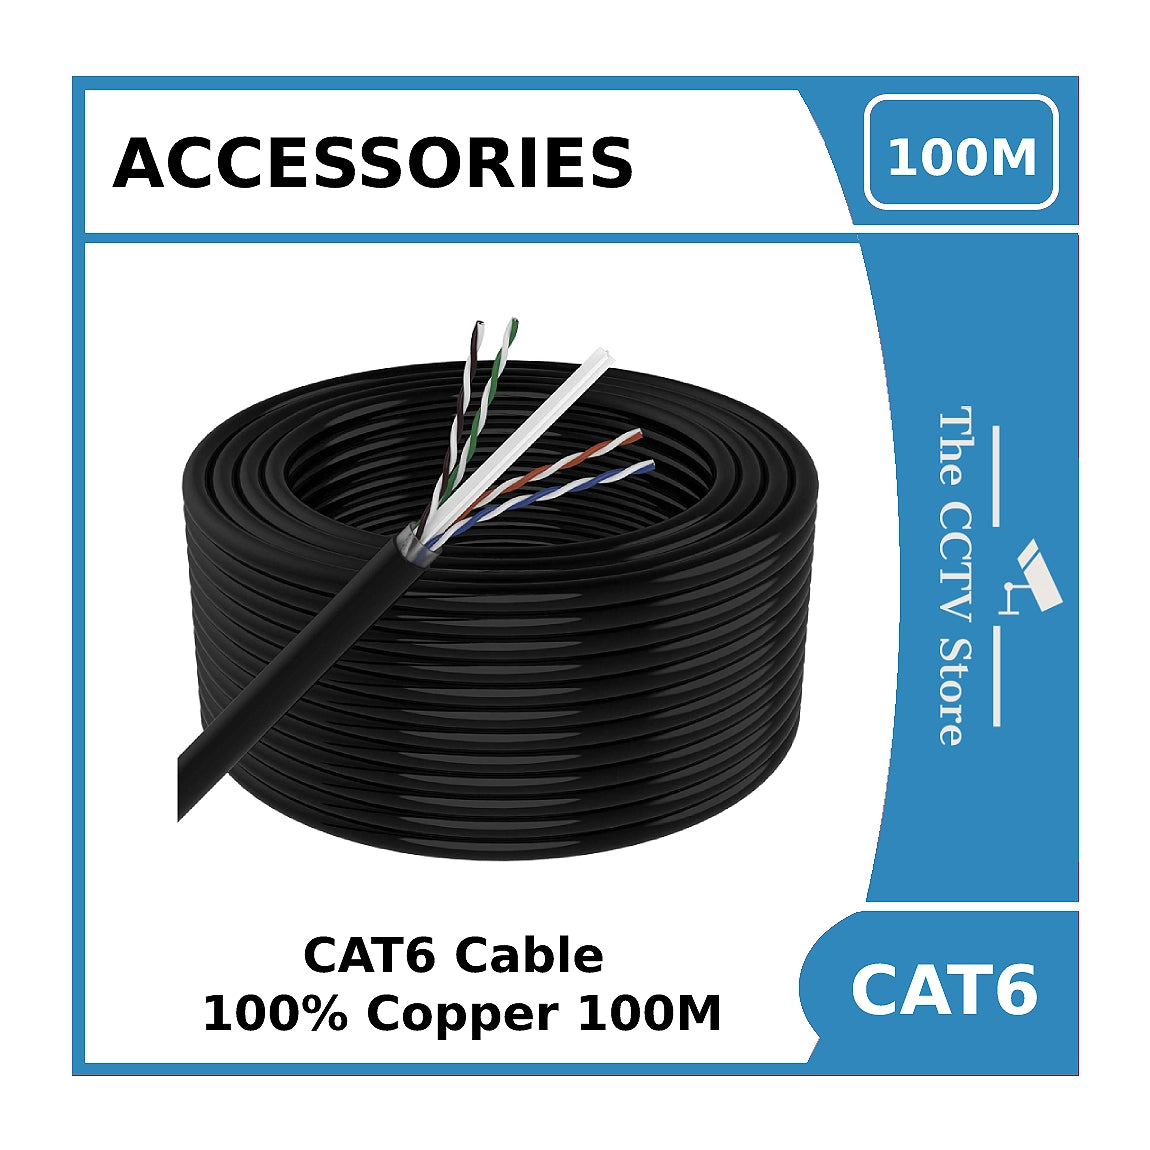 CAT6 Full Copper Outdoor UTP Networking Cable - Black 23 AWG - 100m